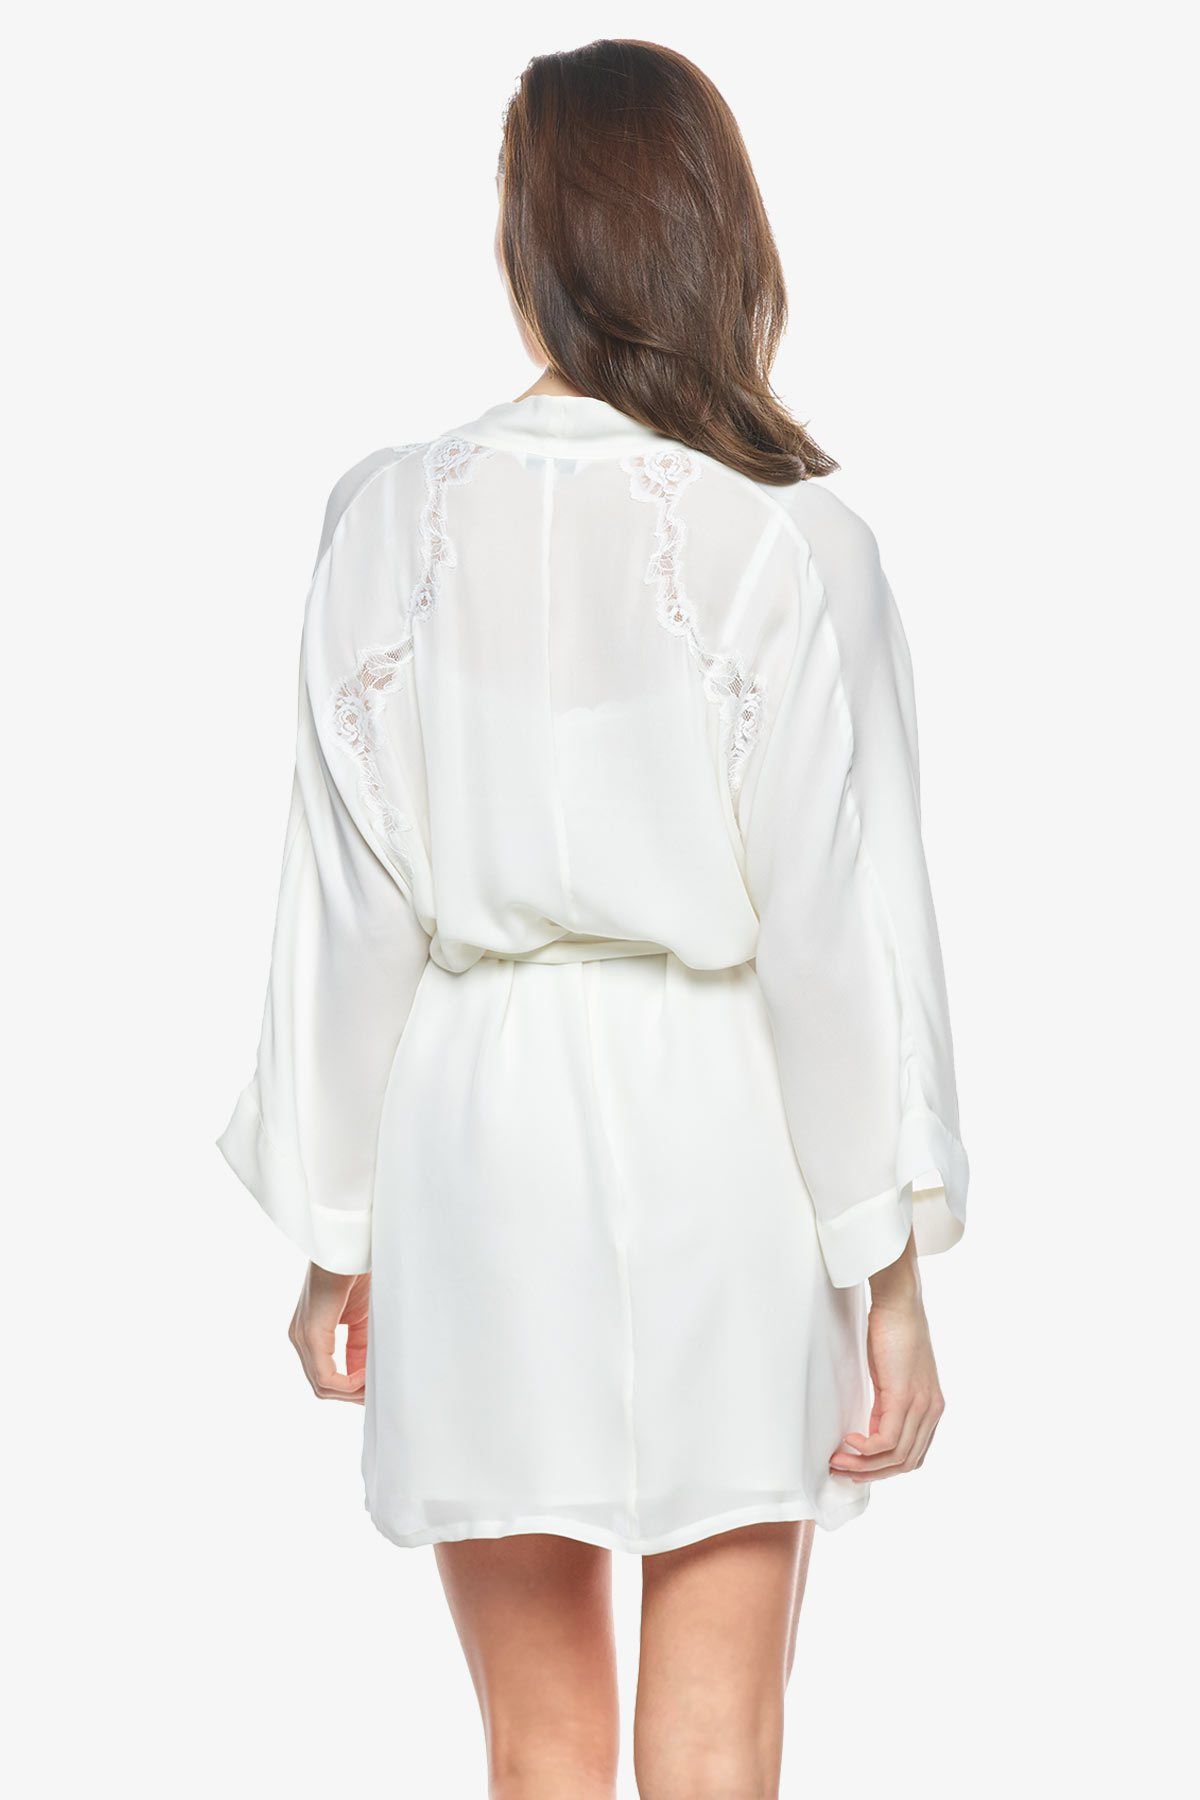 Backview of model wearing Sigrid short bridal robes in pearl-white